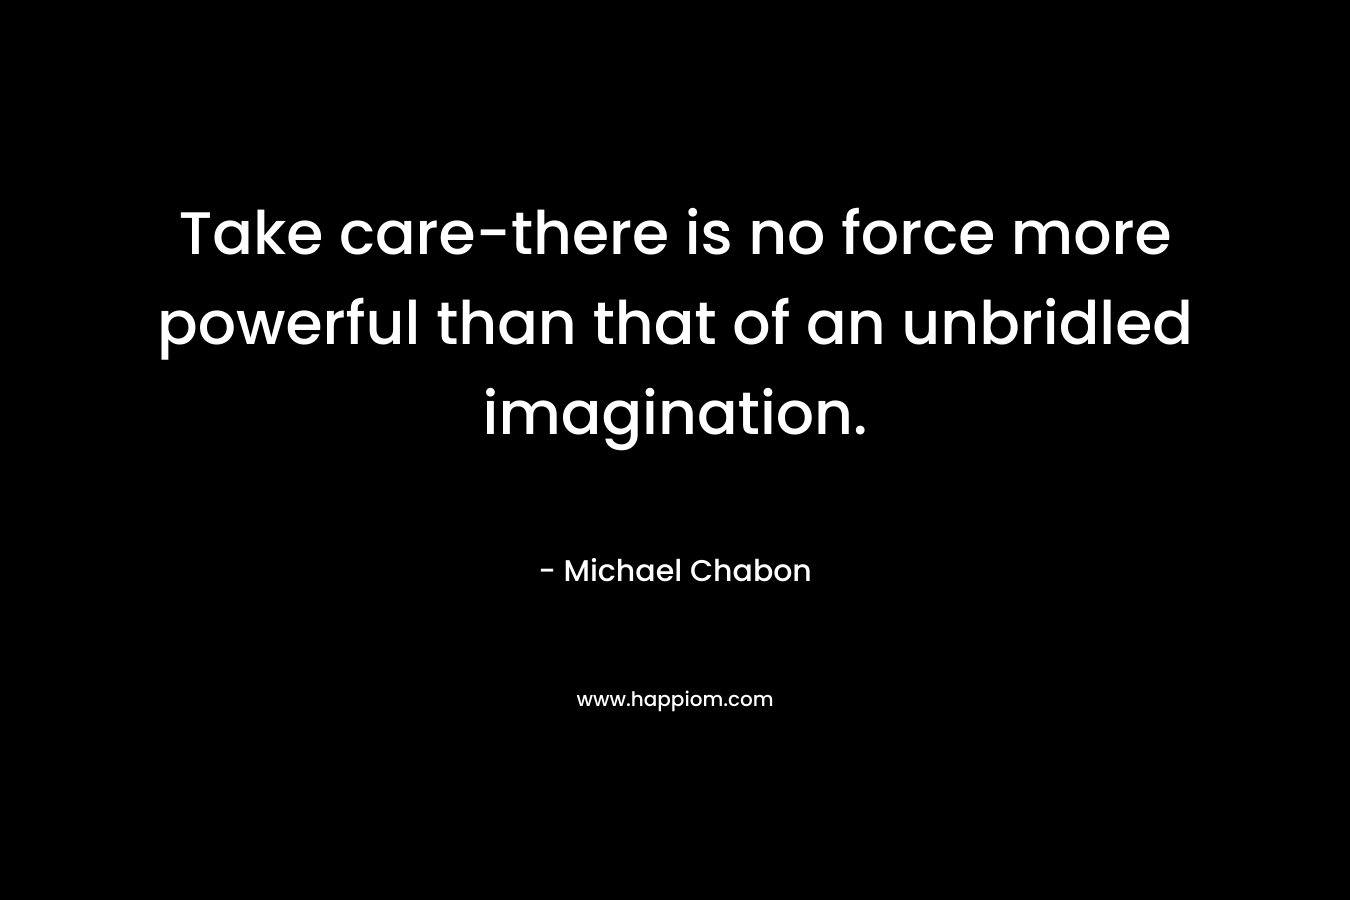 Take care-there is no force more powerful than that of an unbridled imagination. – Michael Chabon